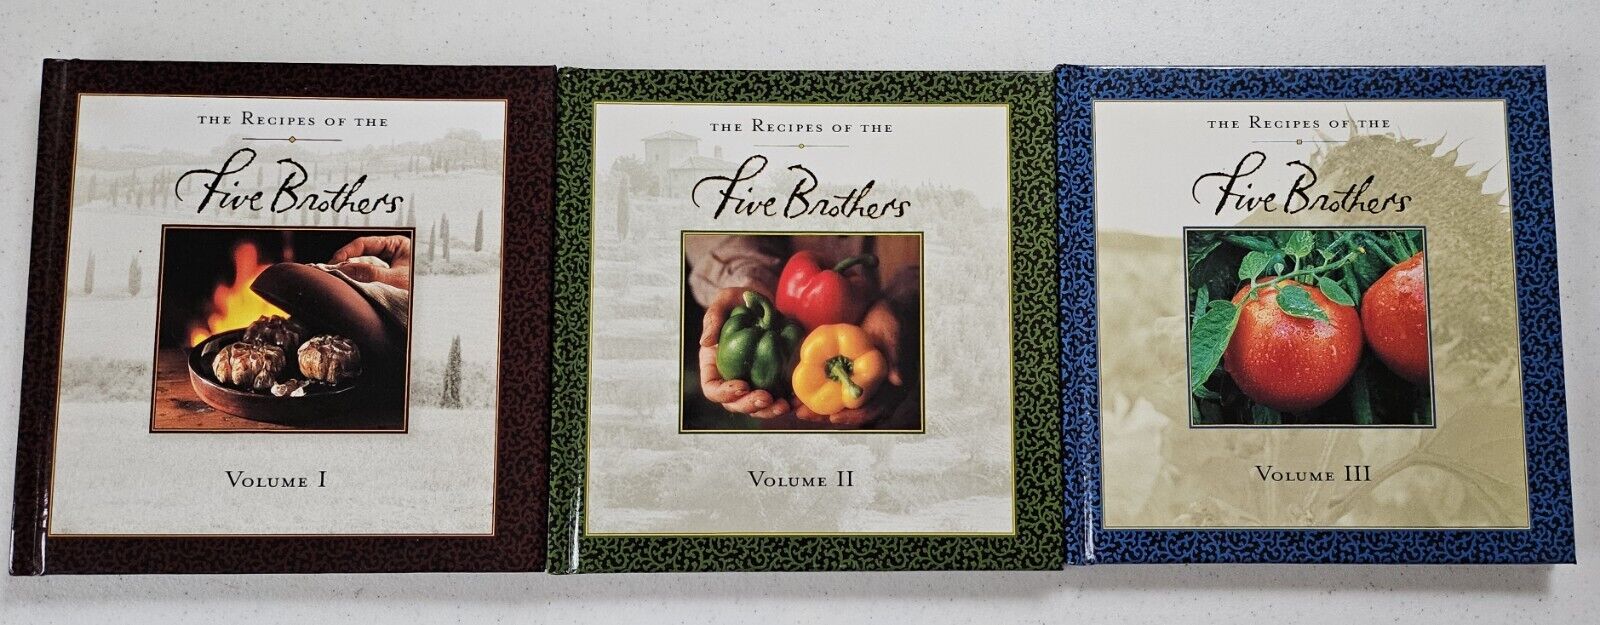 The Five Brothers Vols. I, II & III  Varied Recipes Square/thin